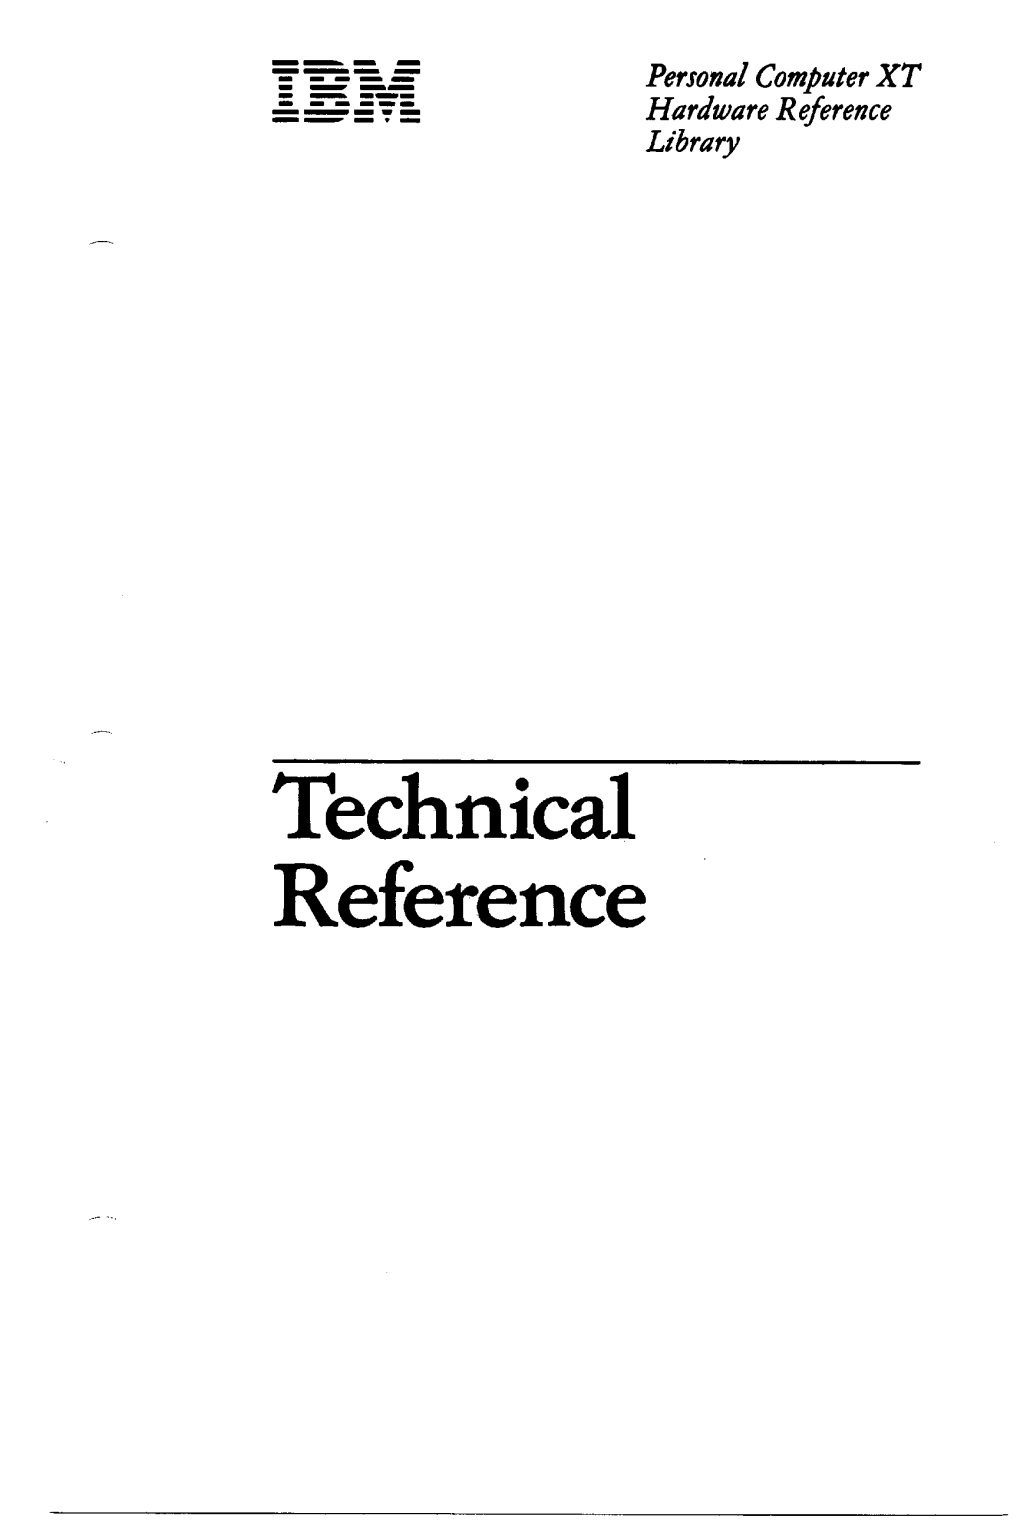 IBM Personal Computer XT Hardware Reference Library Technical